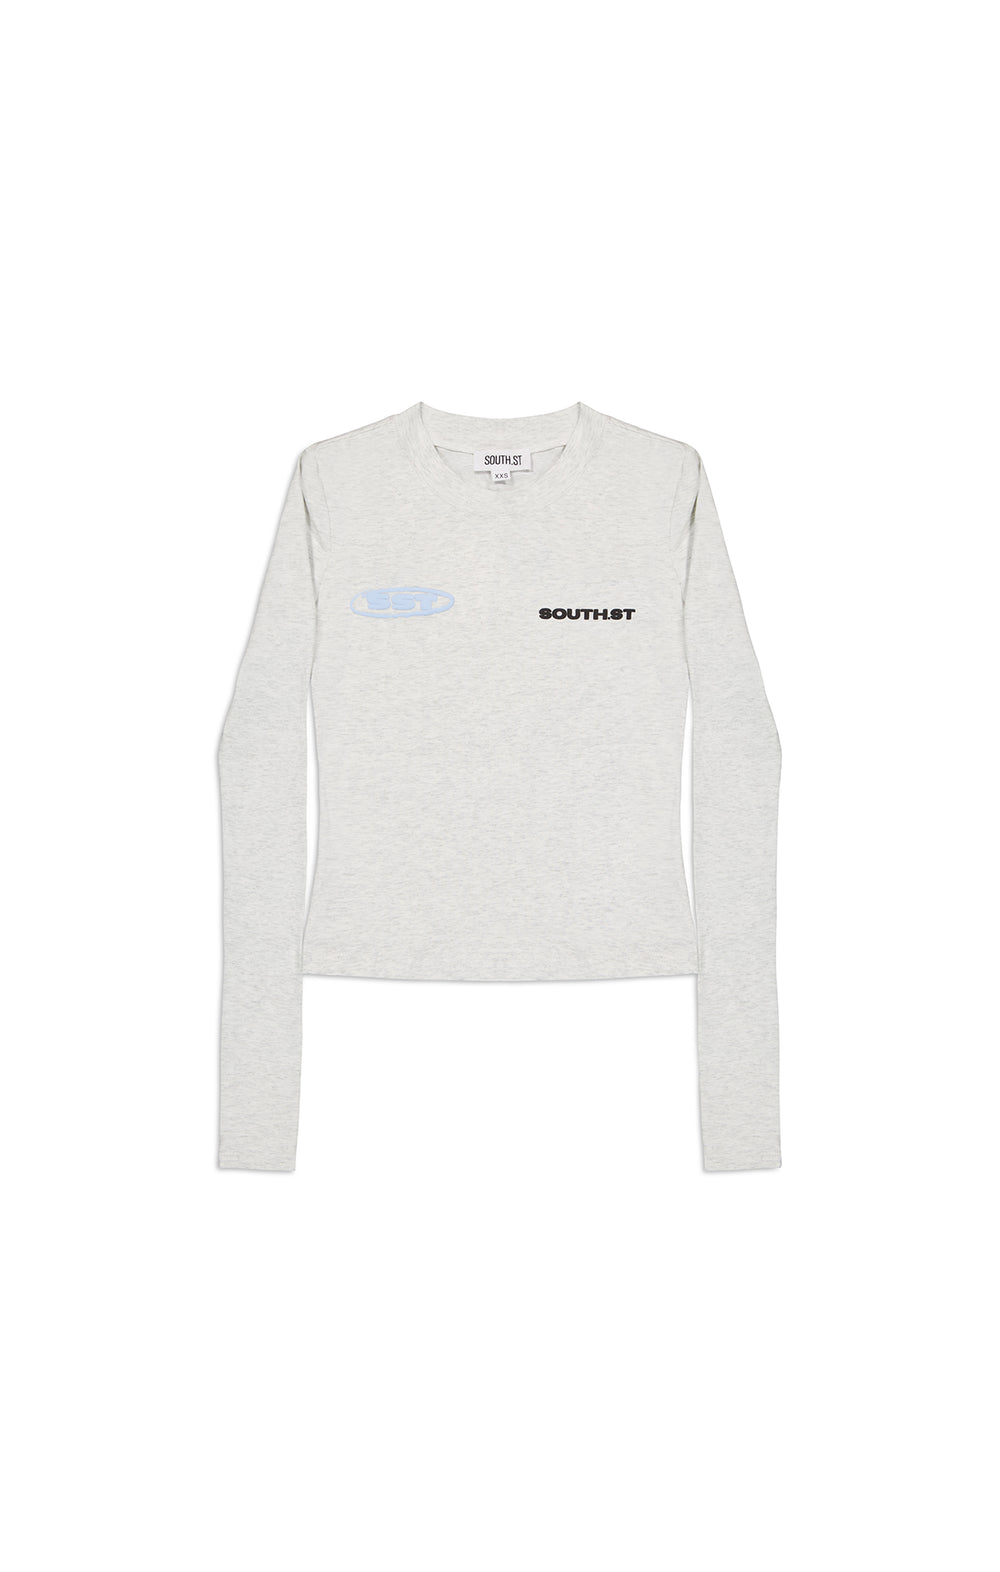 "COMPETE" TOP - Marl Grey